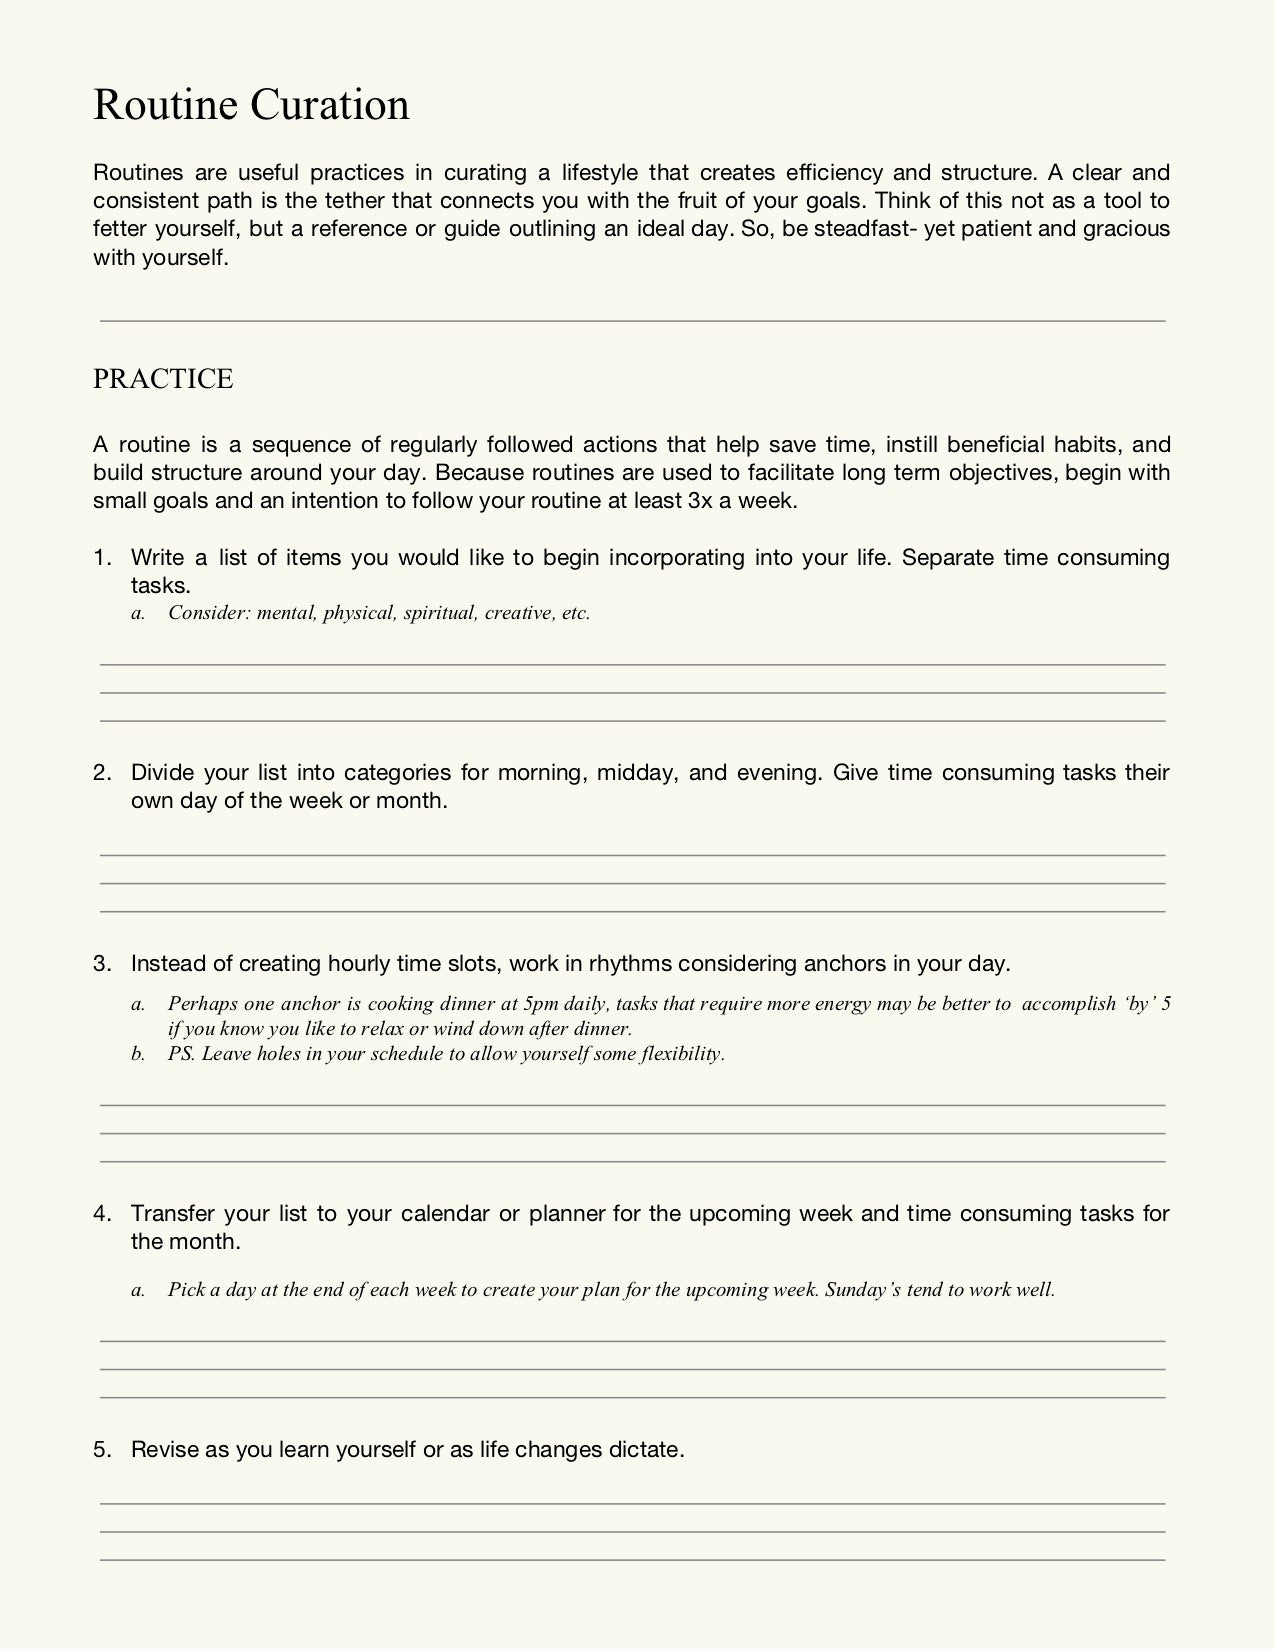 Routine Curation Worksheet